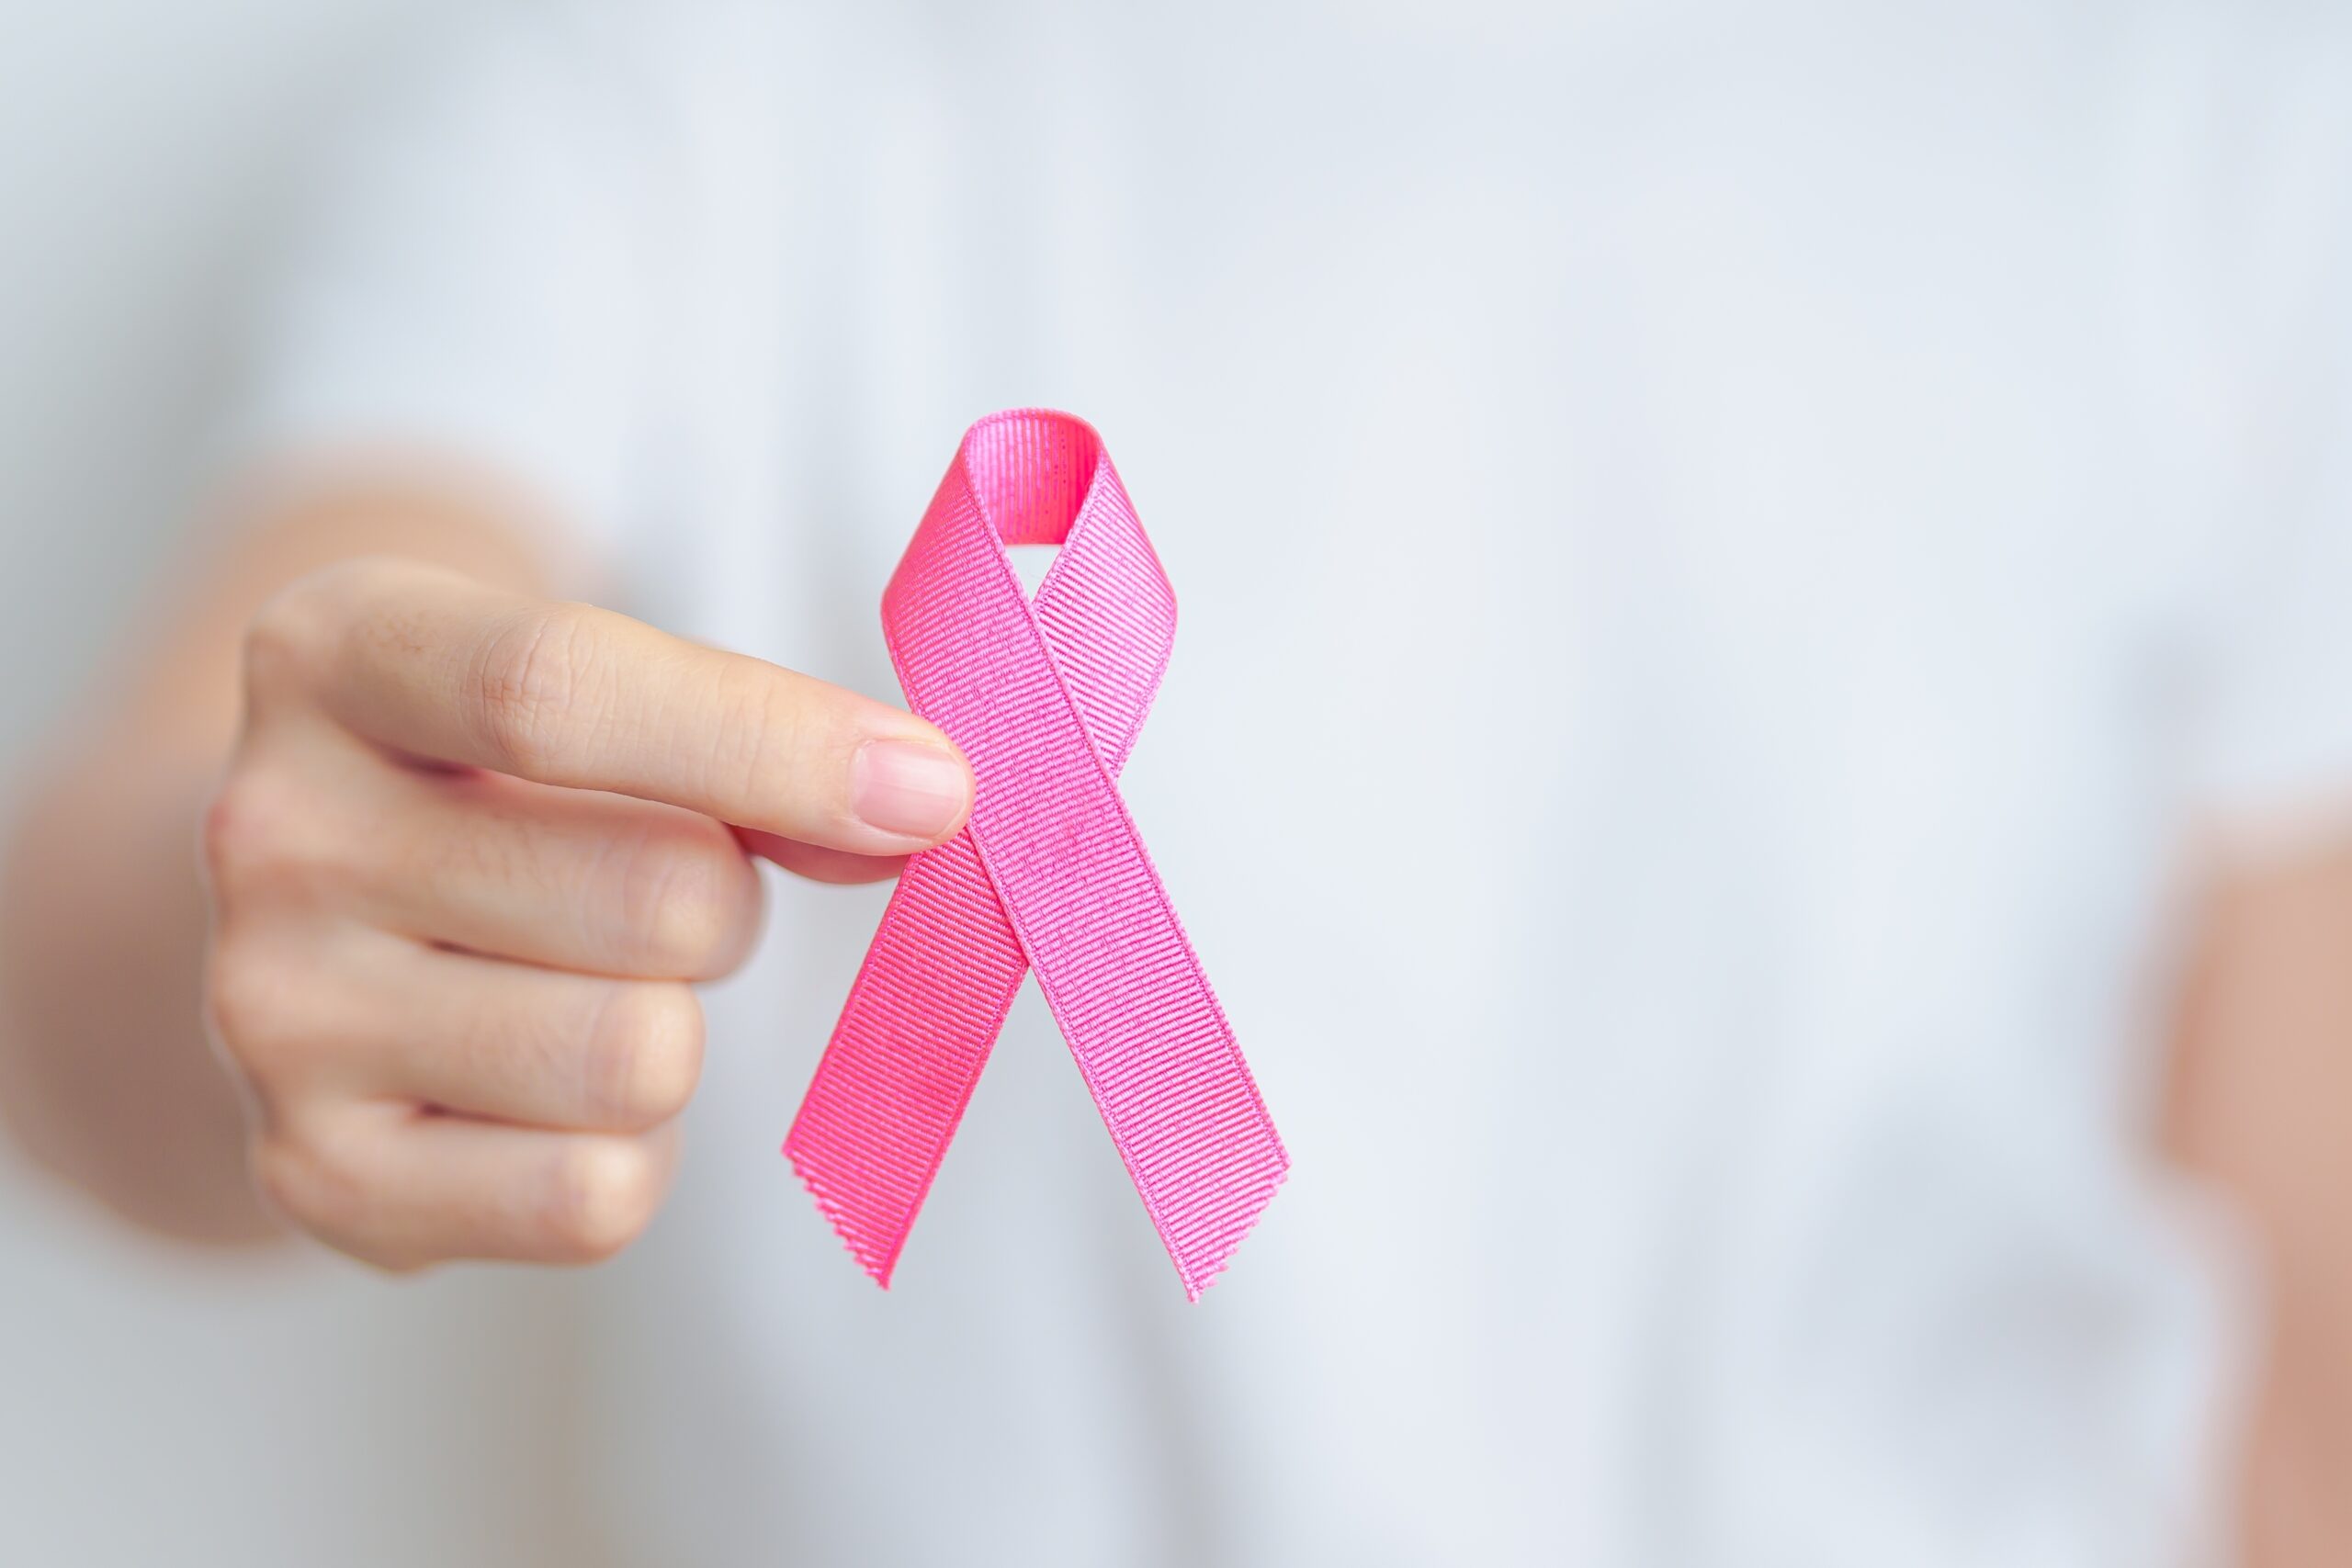 Breast Cancer: What Is, Causes, Symptoms, Diagnosis, and Prevention